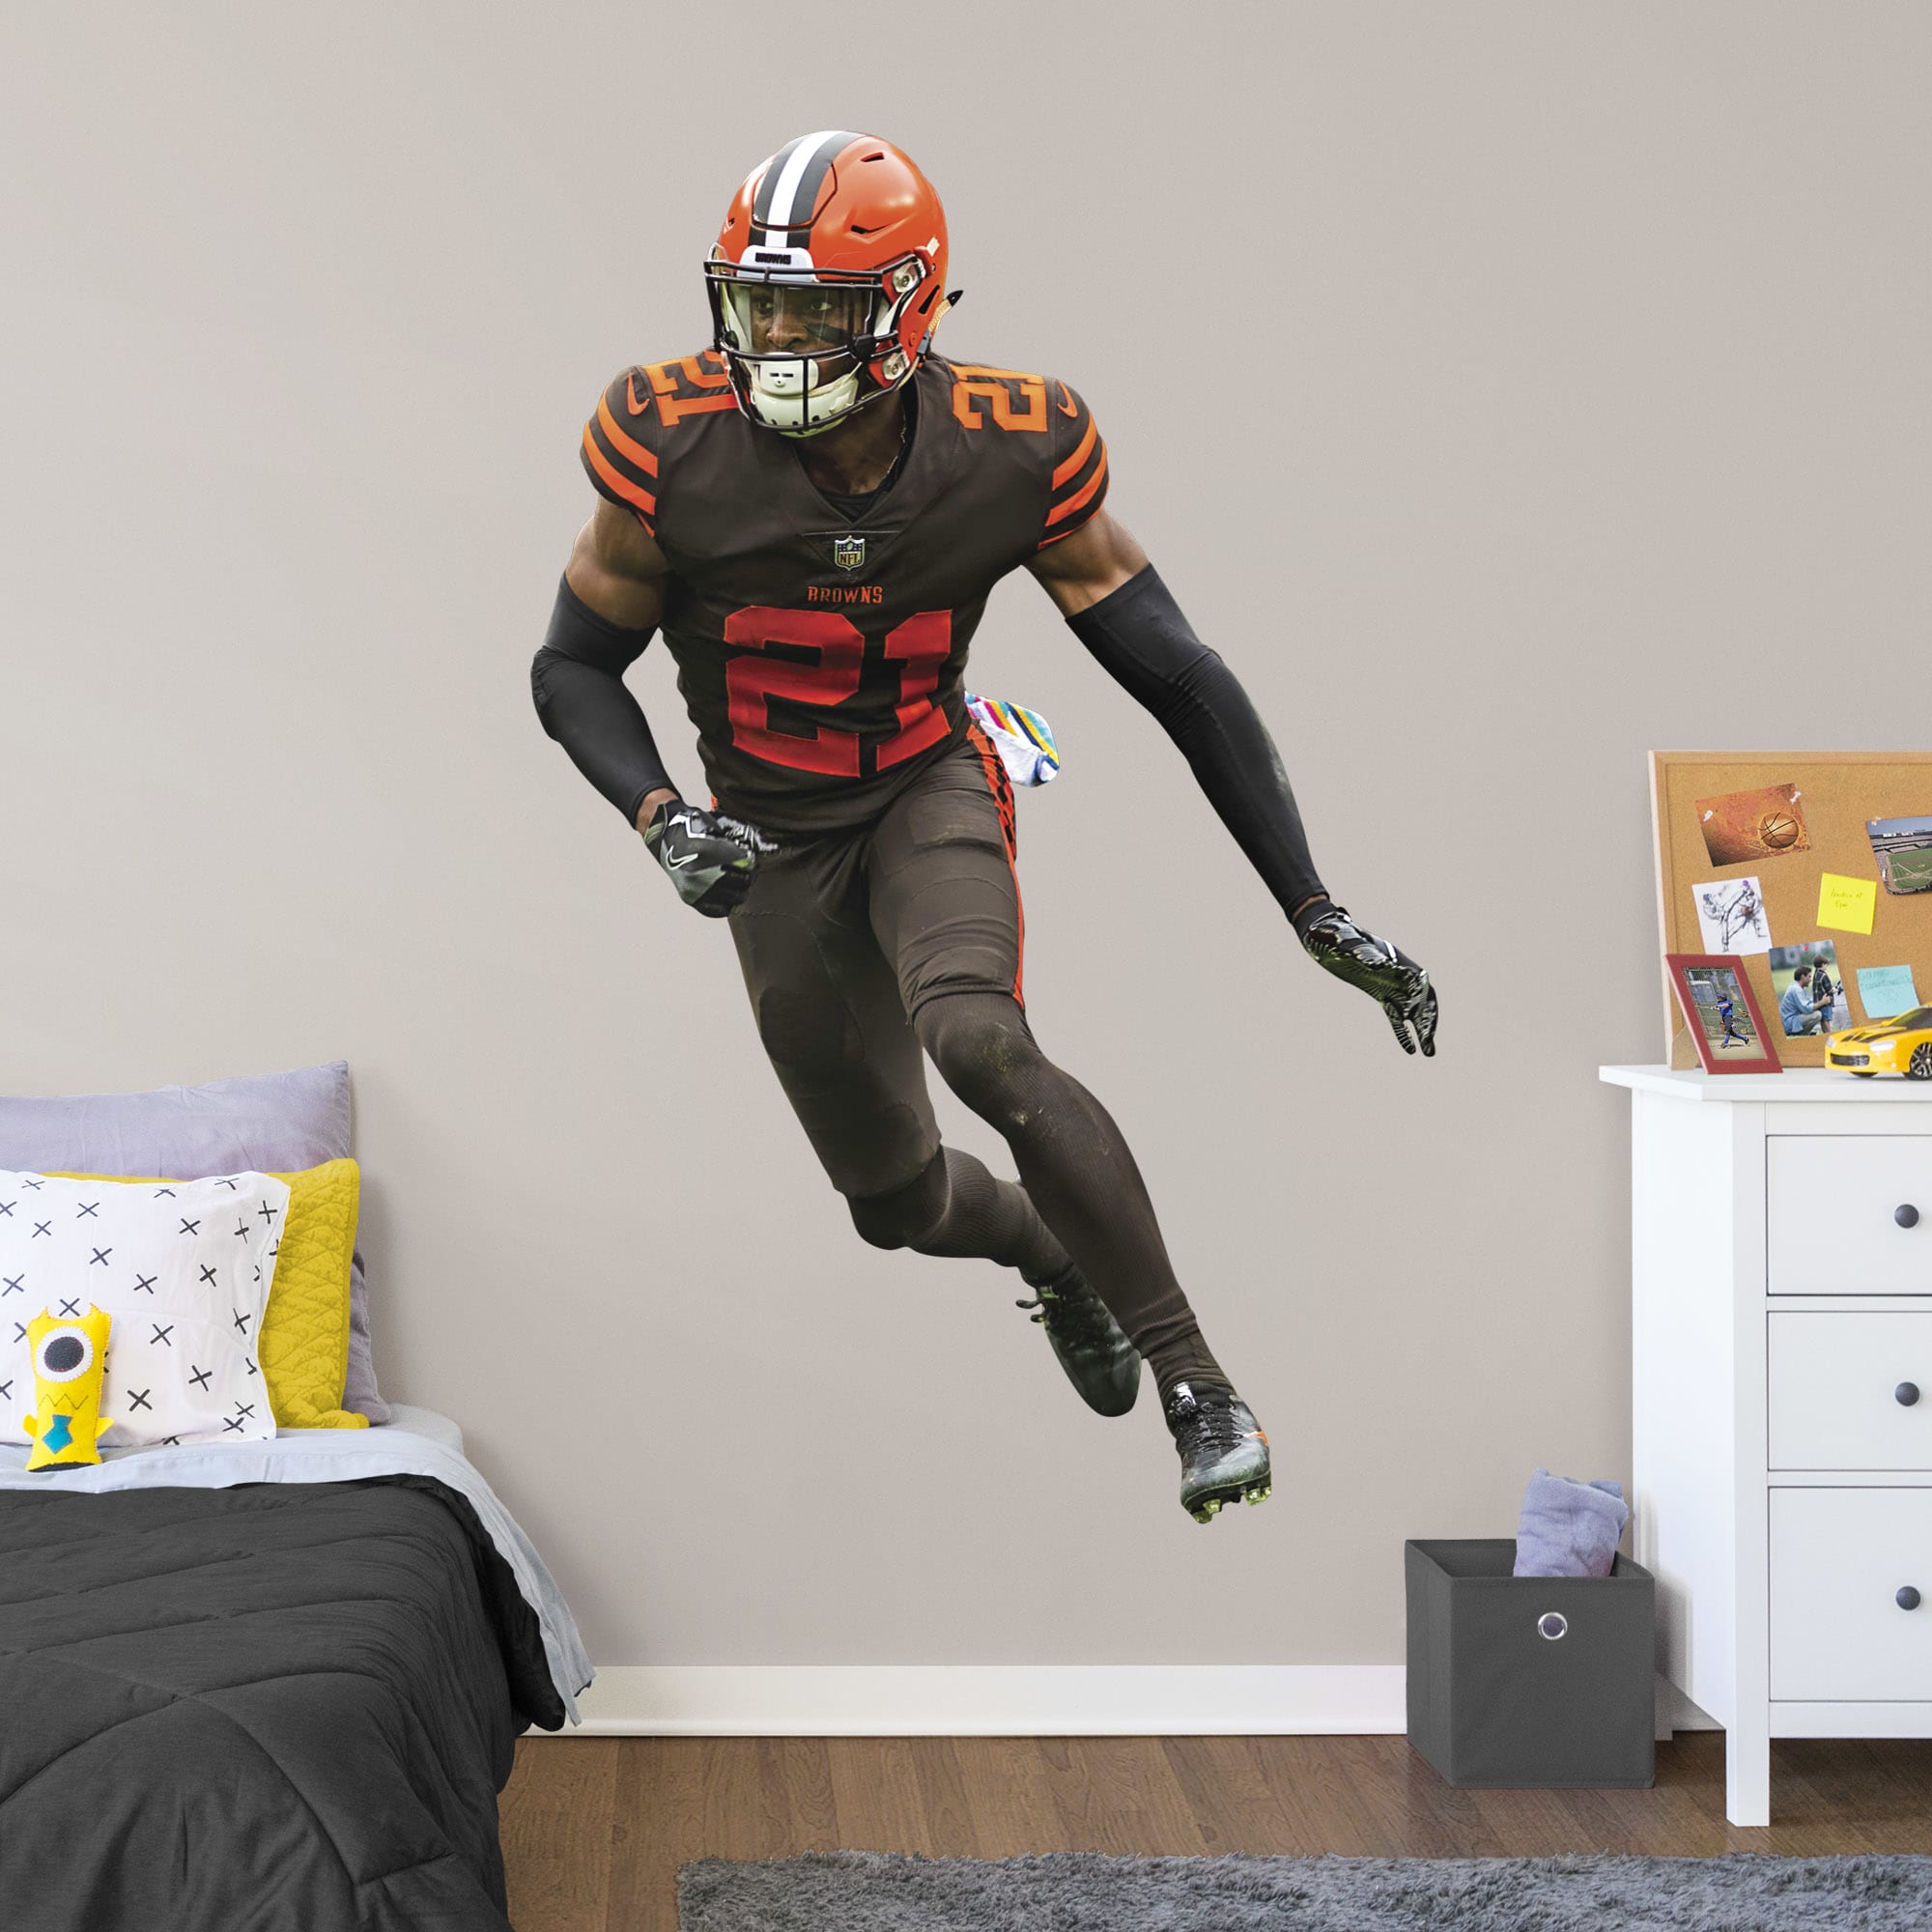 Denzel Ward for Cleveland Browns - Officially Licensed NFL Removable Wall Decal Life-Size Athlete + 2 Decals (49"W x 75"H) by Fa